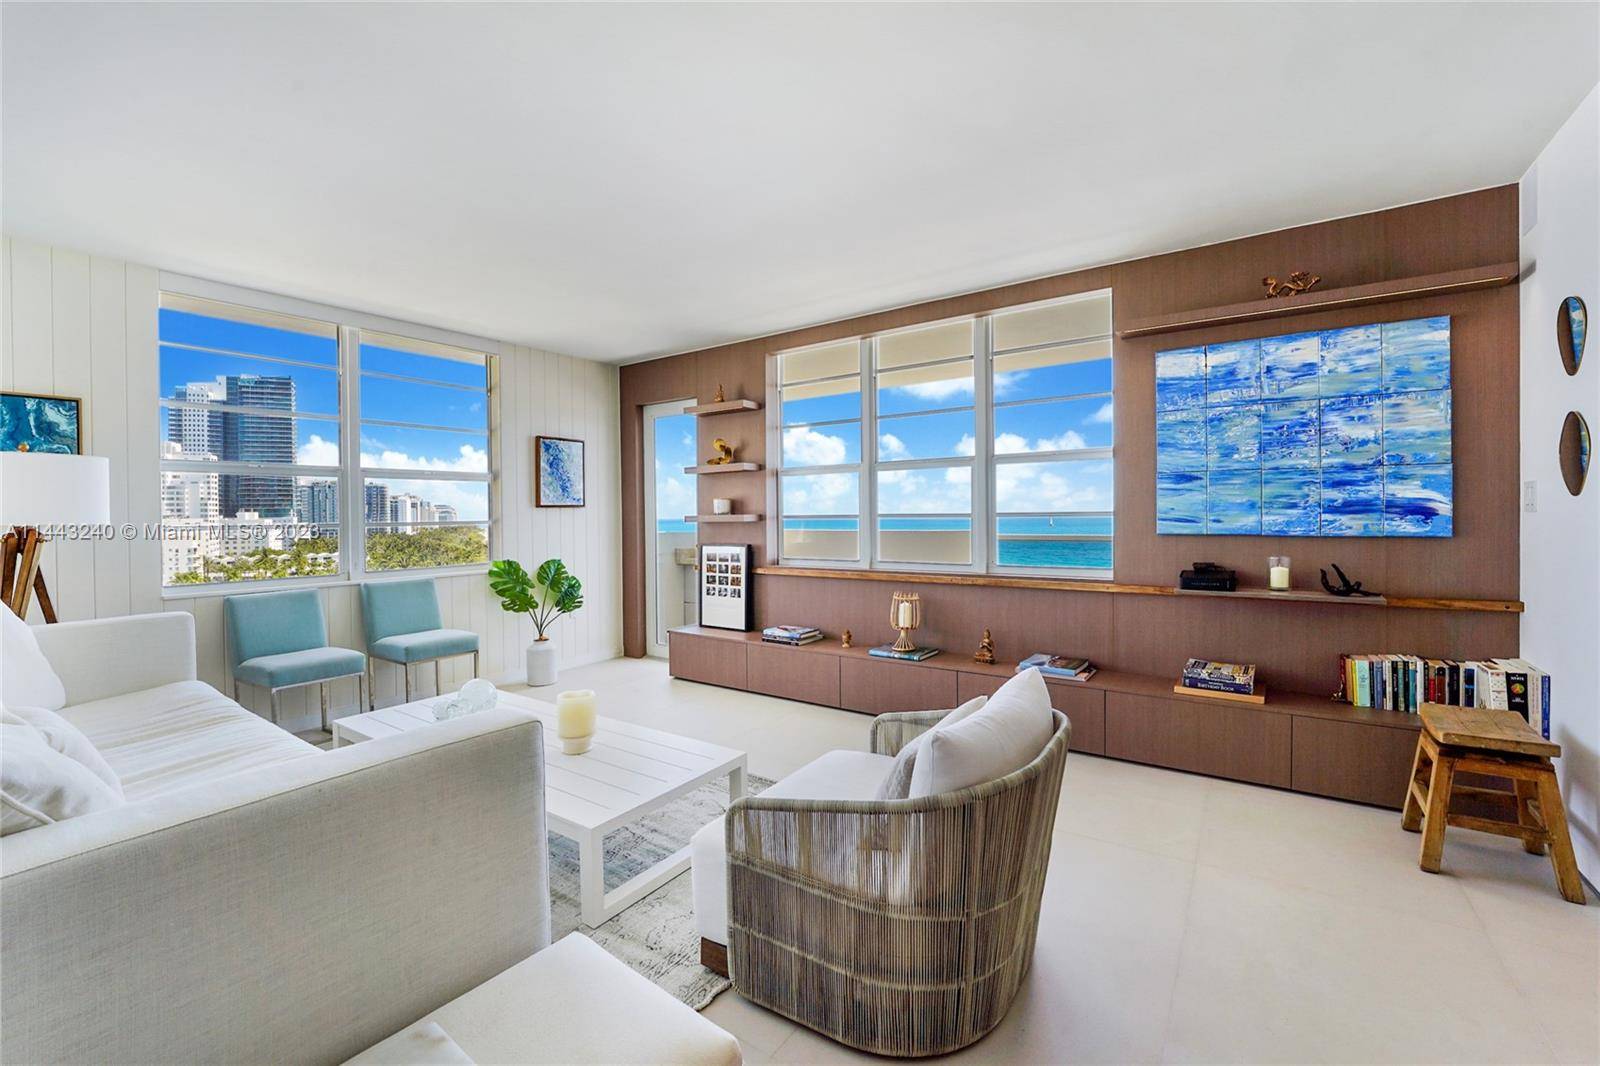 Stunning high end renovation, stylishly furnished, 1190SF 2 bed 2 bath corner residence in the coveted 47 line with direct oceanfront views.